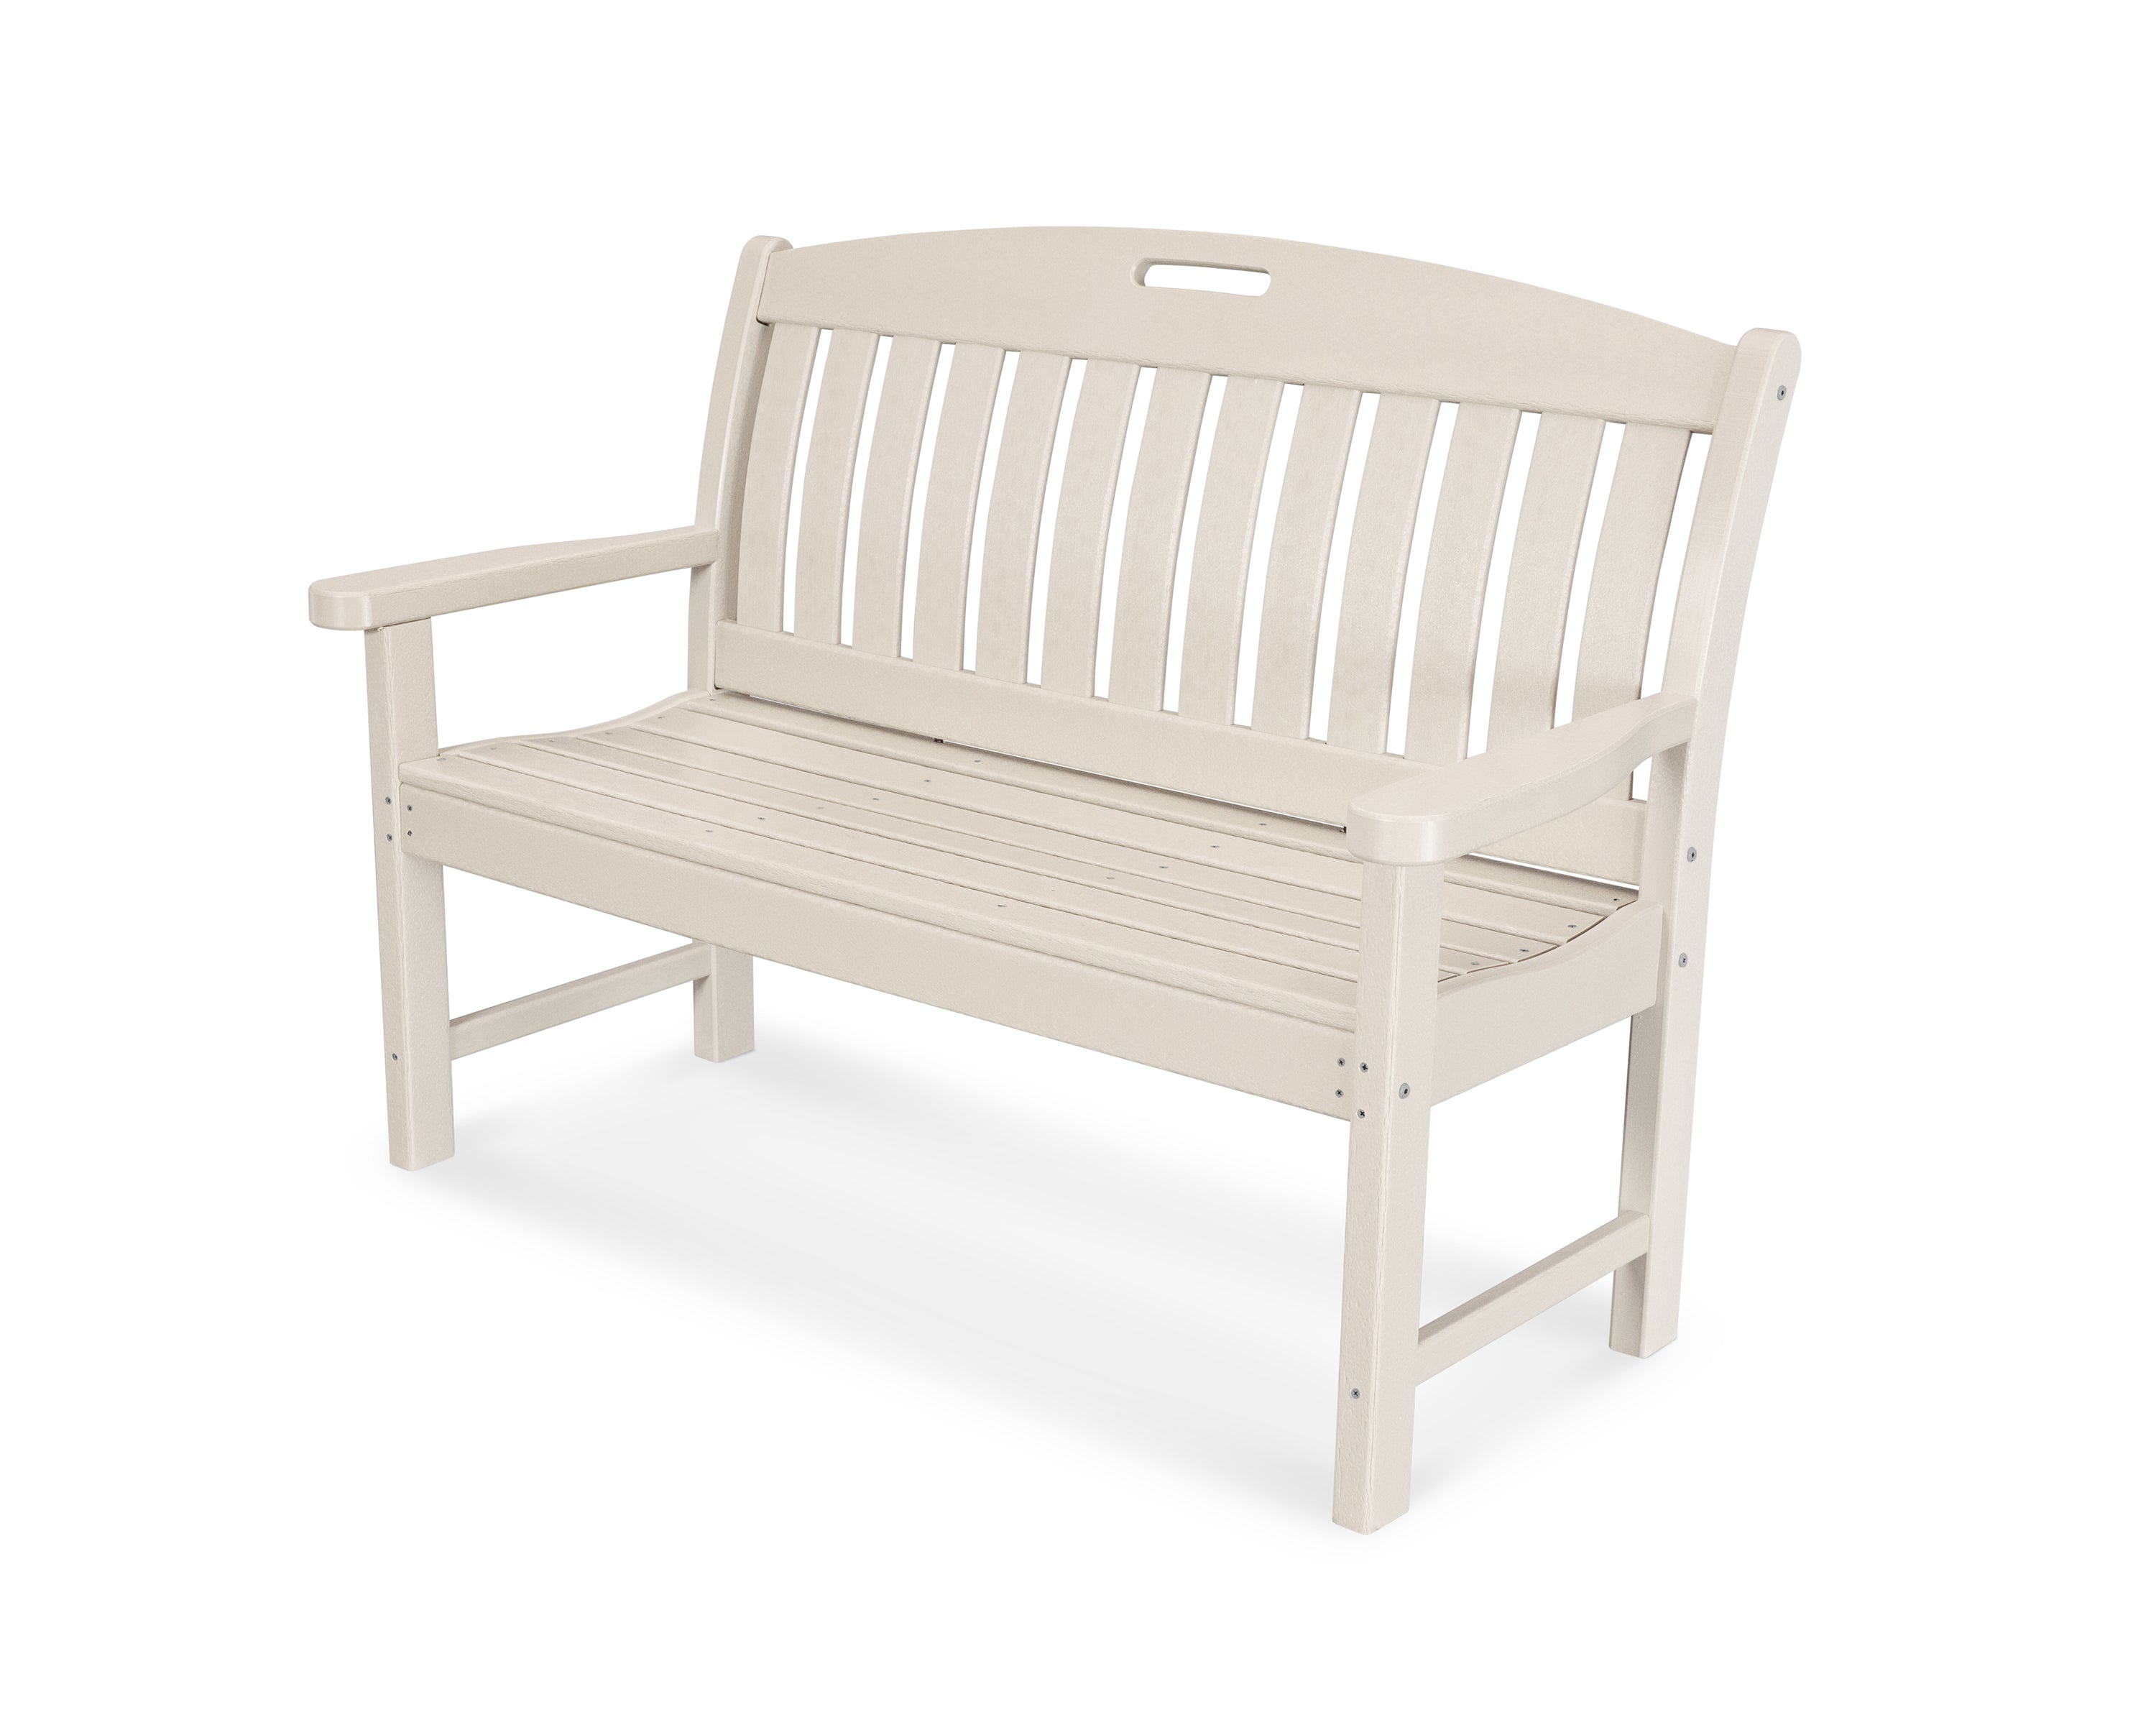 POLYWOOD® Nautical 48" Bench in Sand